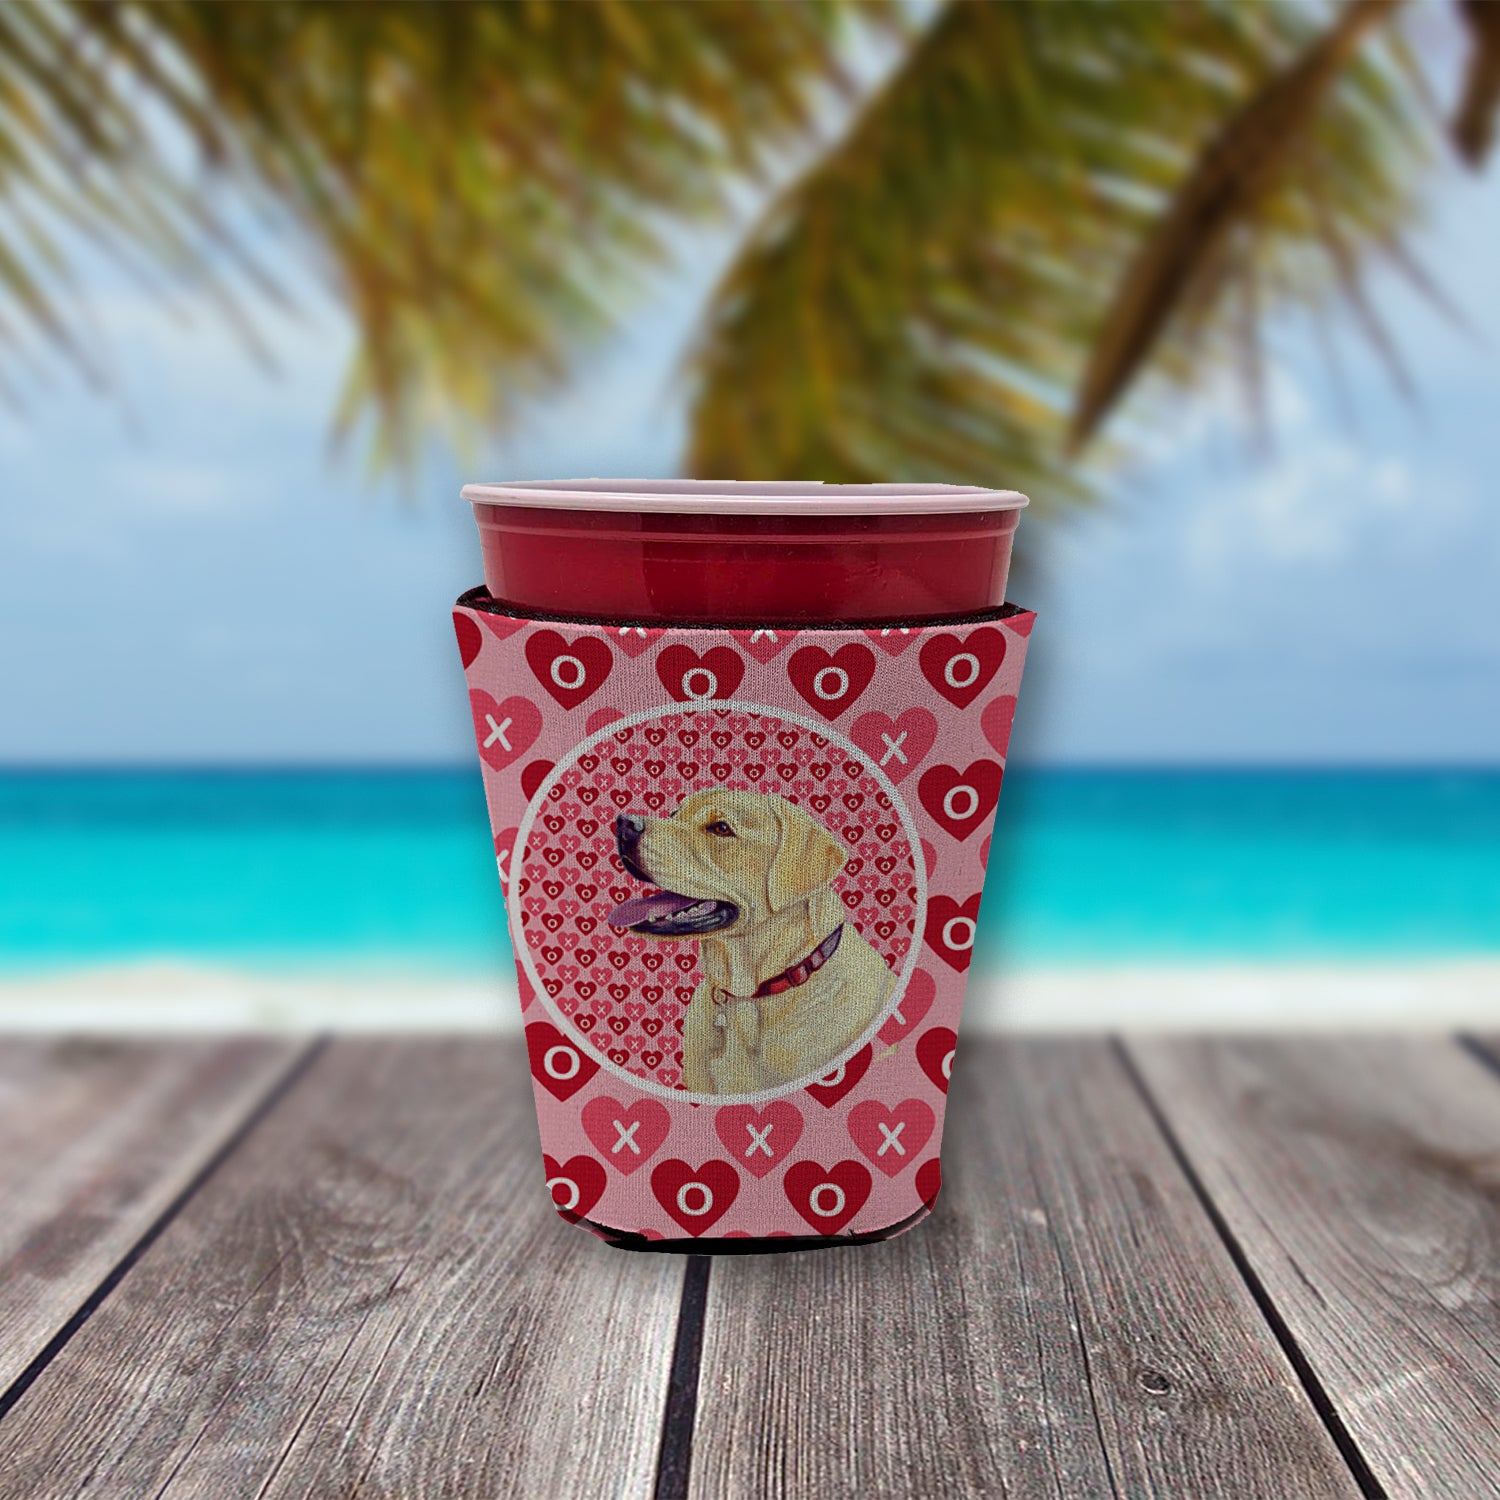 Labrador Valentine's Love and Hearts Red Cup Beverage Insulator Hugger